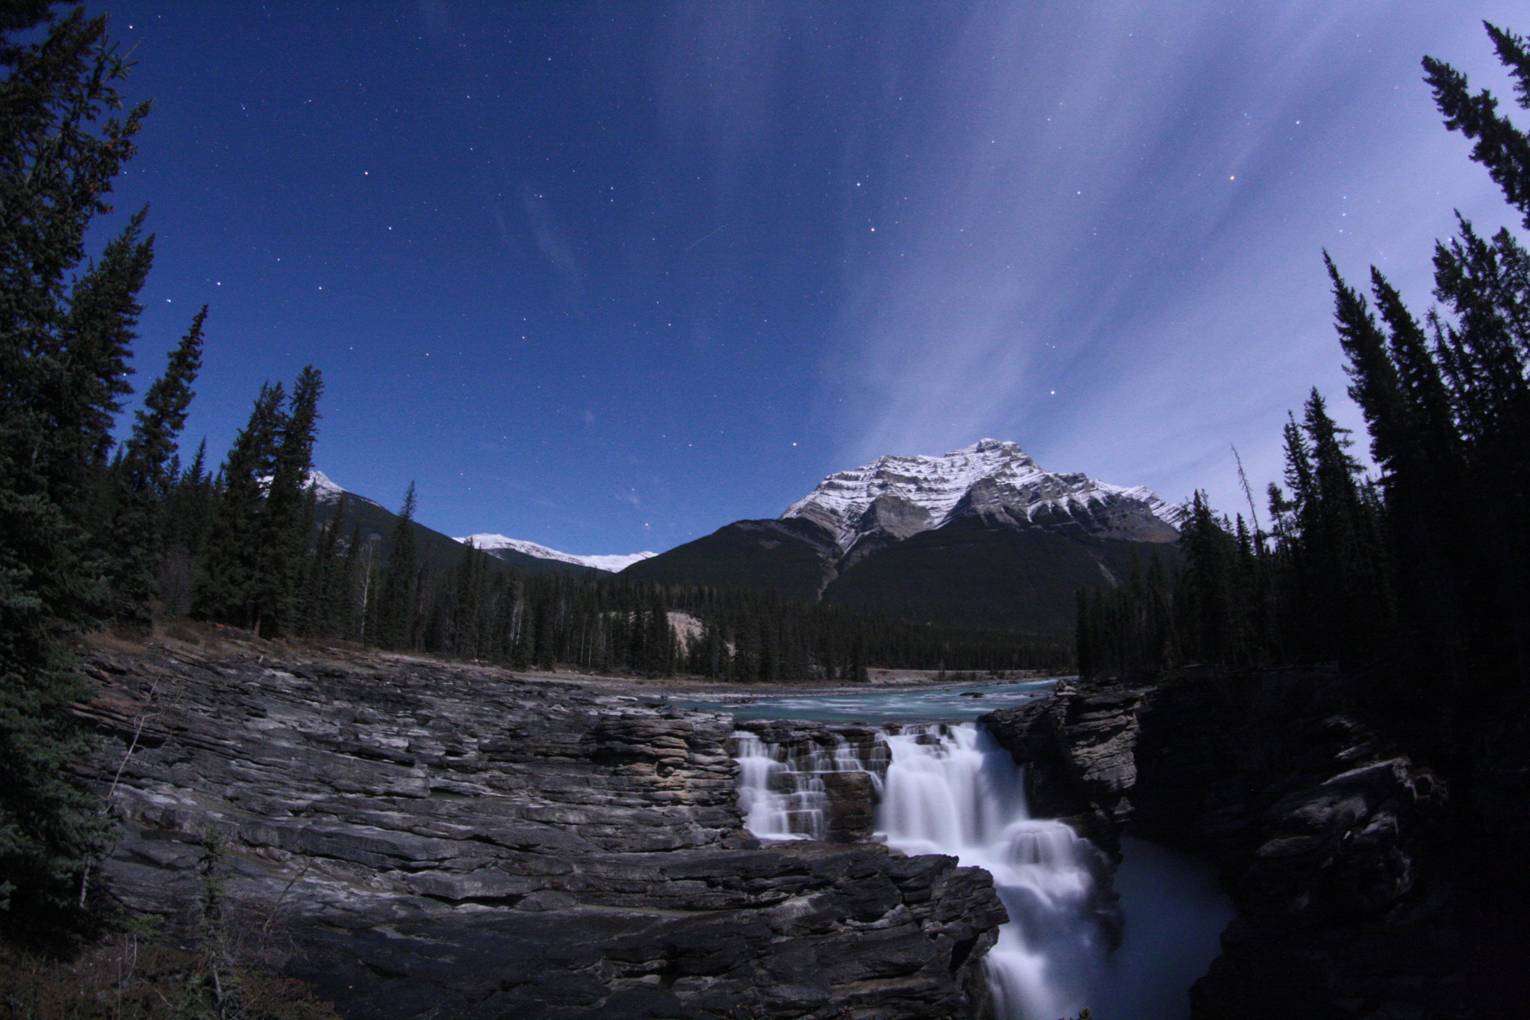 Orion over Athabasca falls in the moonlight in early October